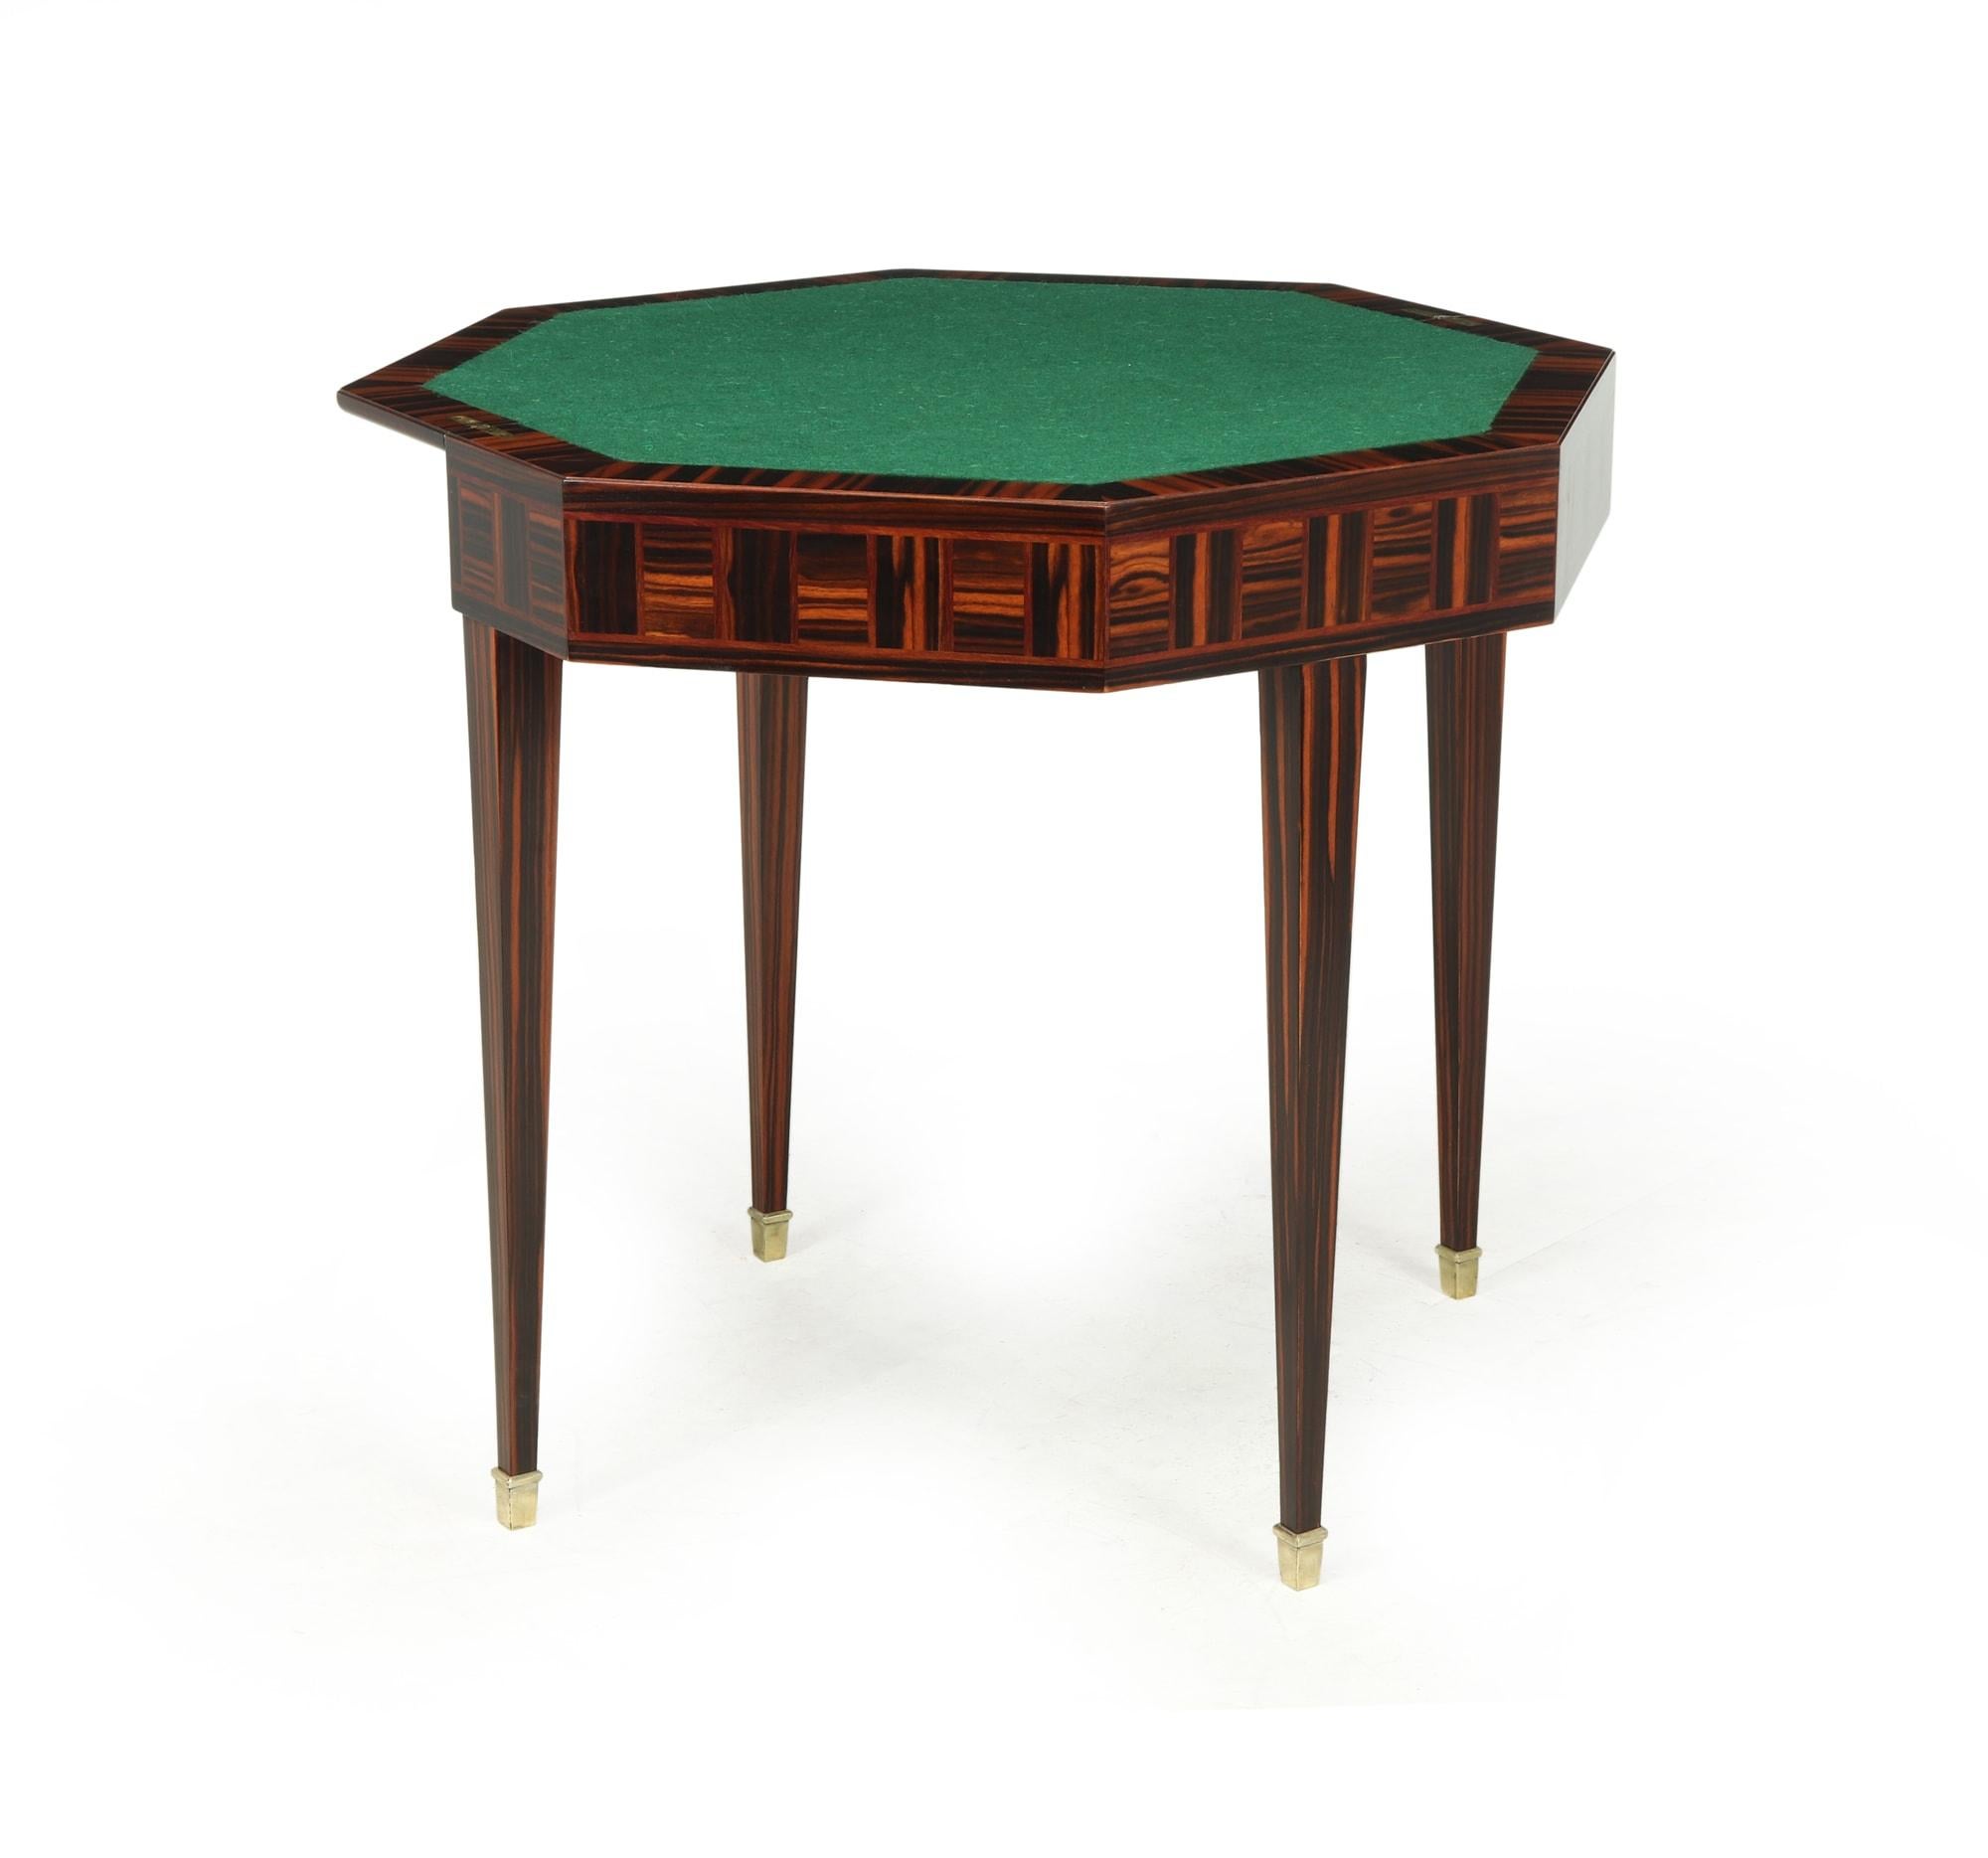 Early 20th Century French Art Deco Card Table in Macassar Ebony, c1925